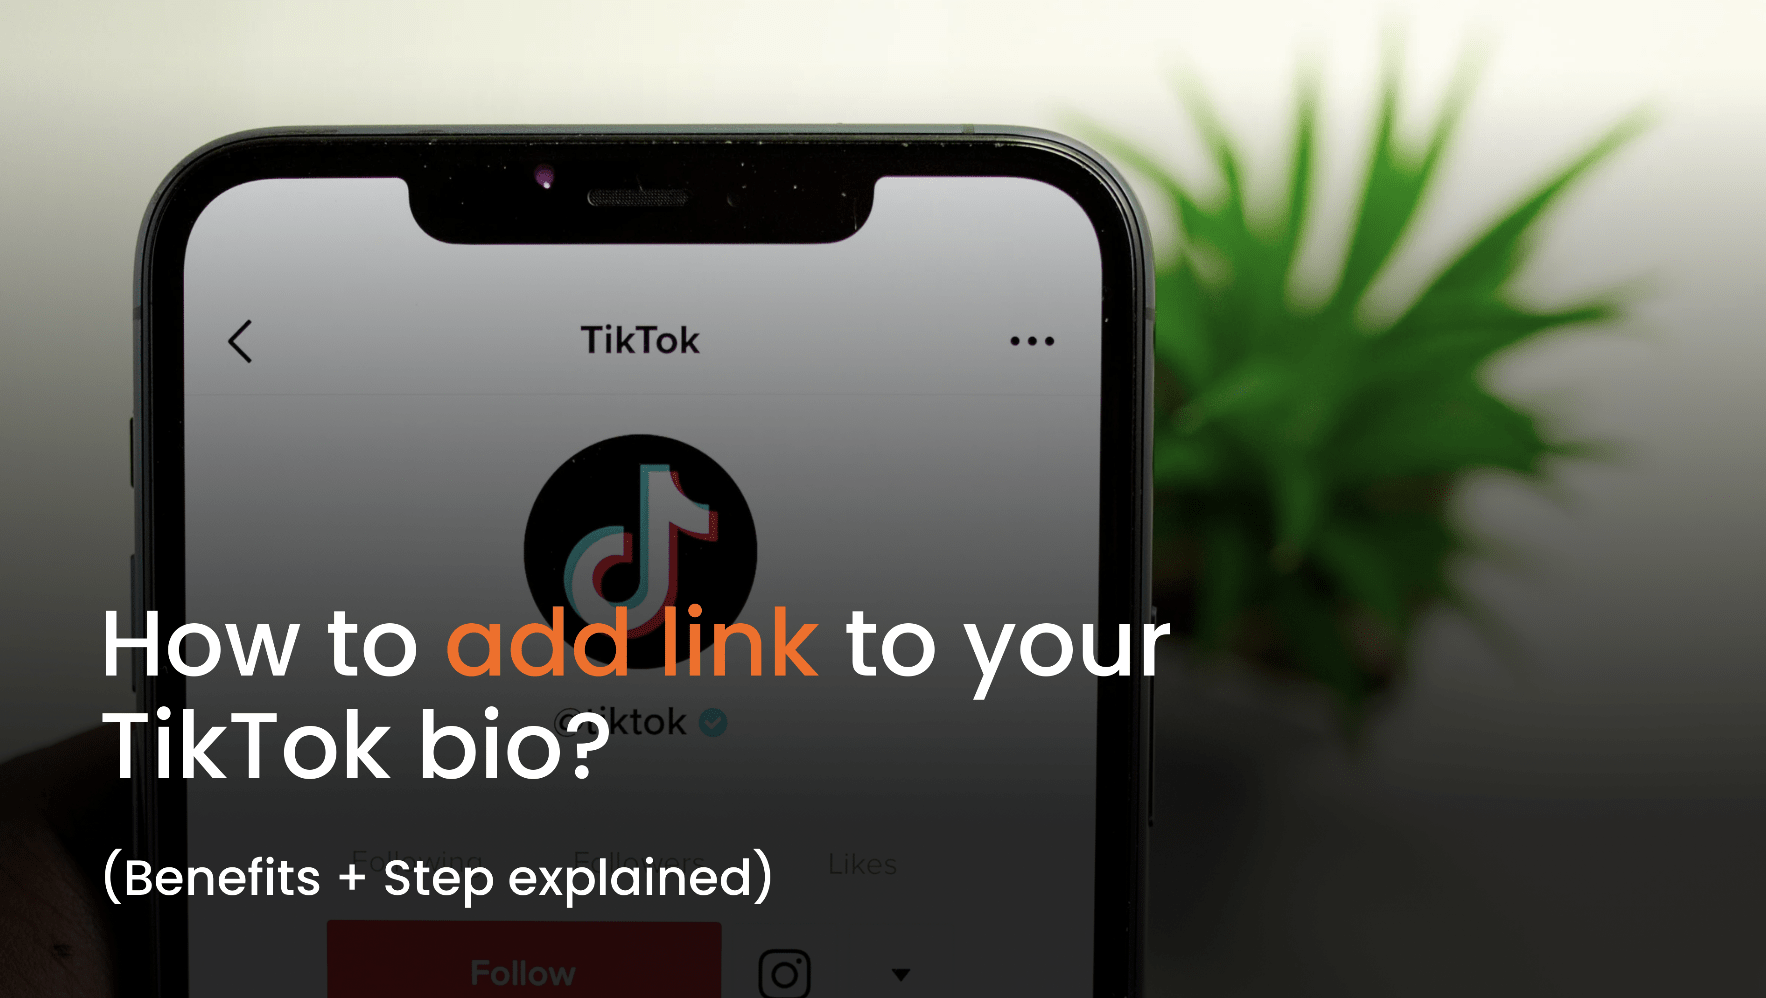 How to Put a Link in TikTok Bio (and Drive More Clicks)